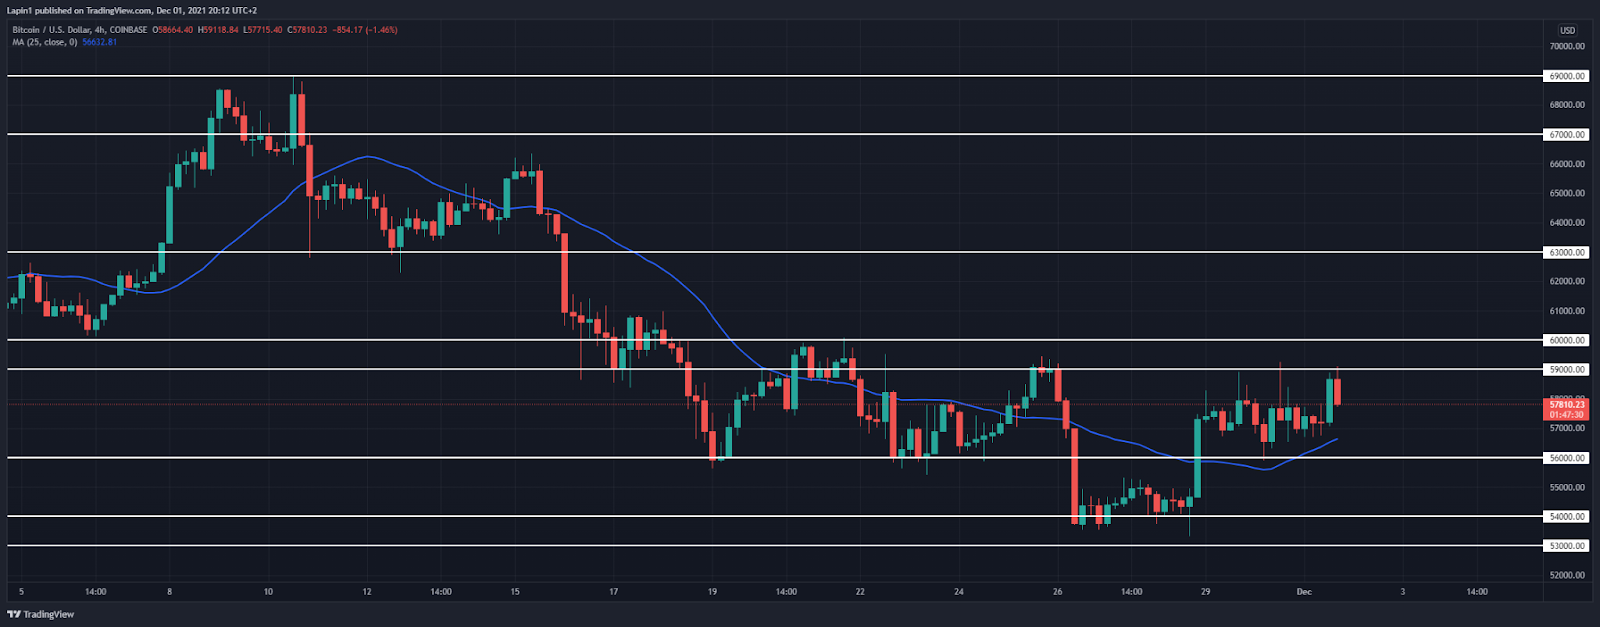 Bitcoin Price Analysis: BTC tests $59,000 resistance again, further downside to follow?